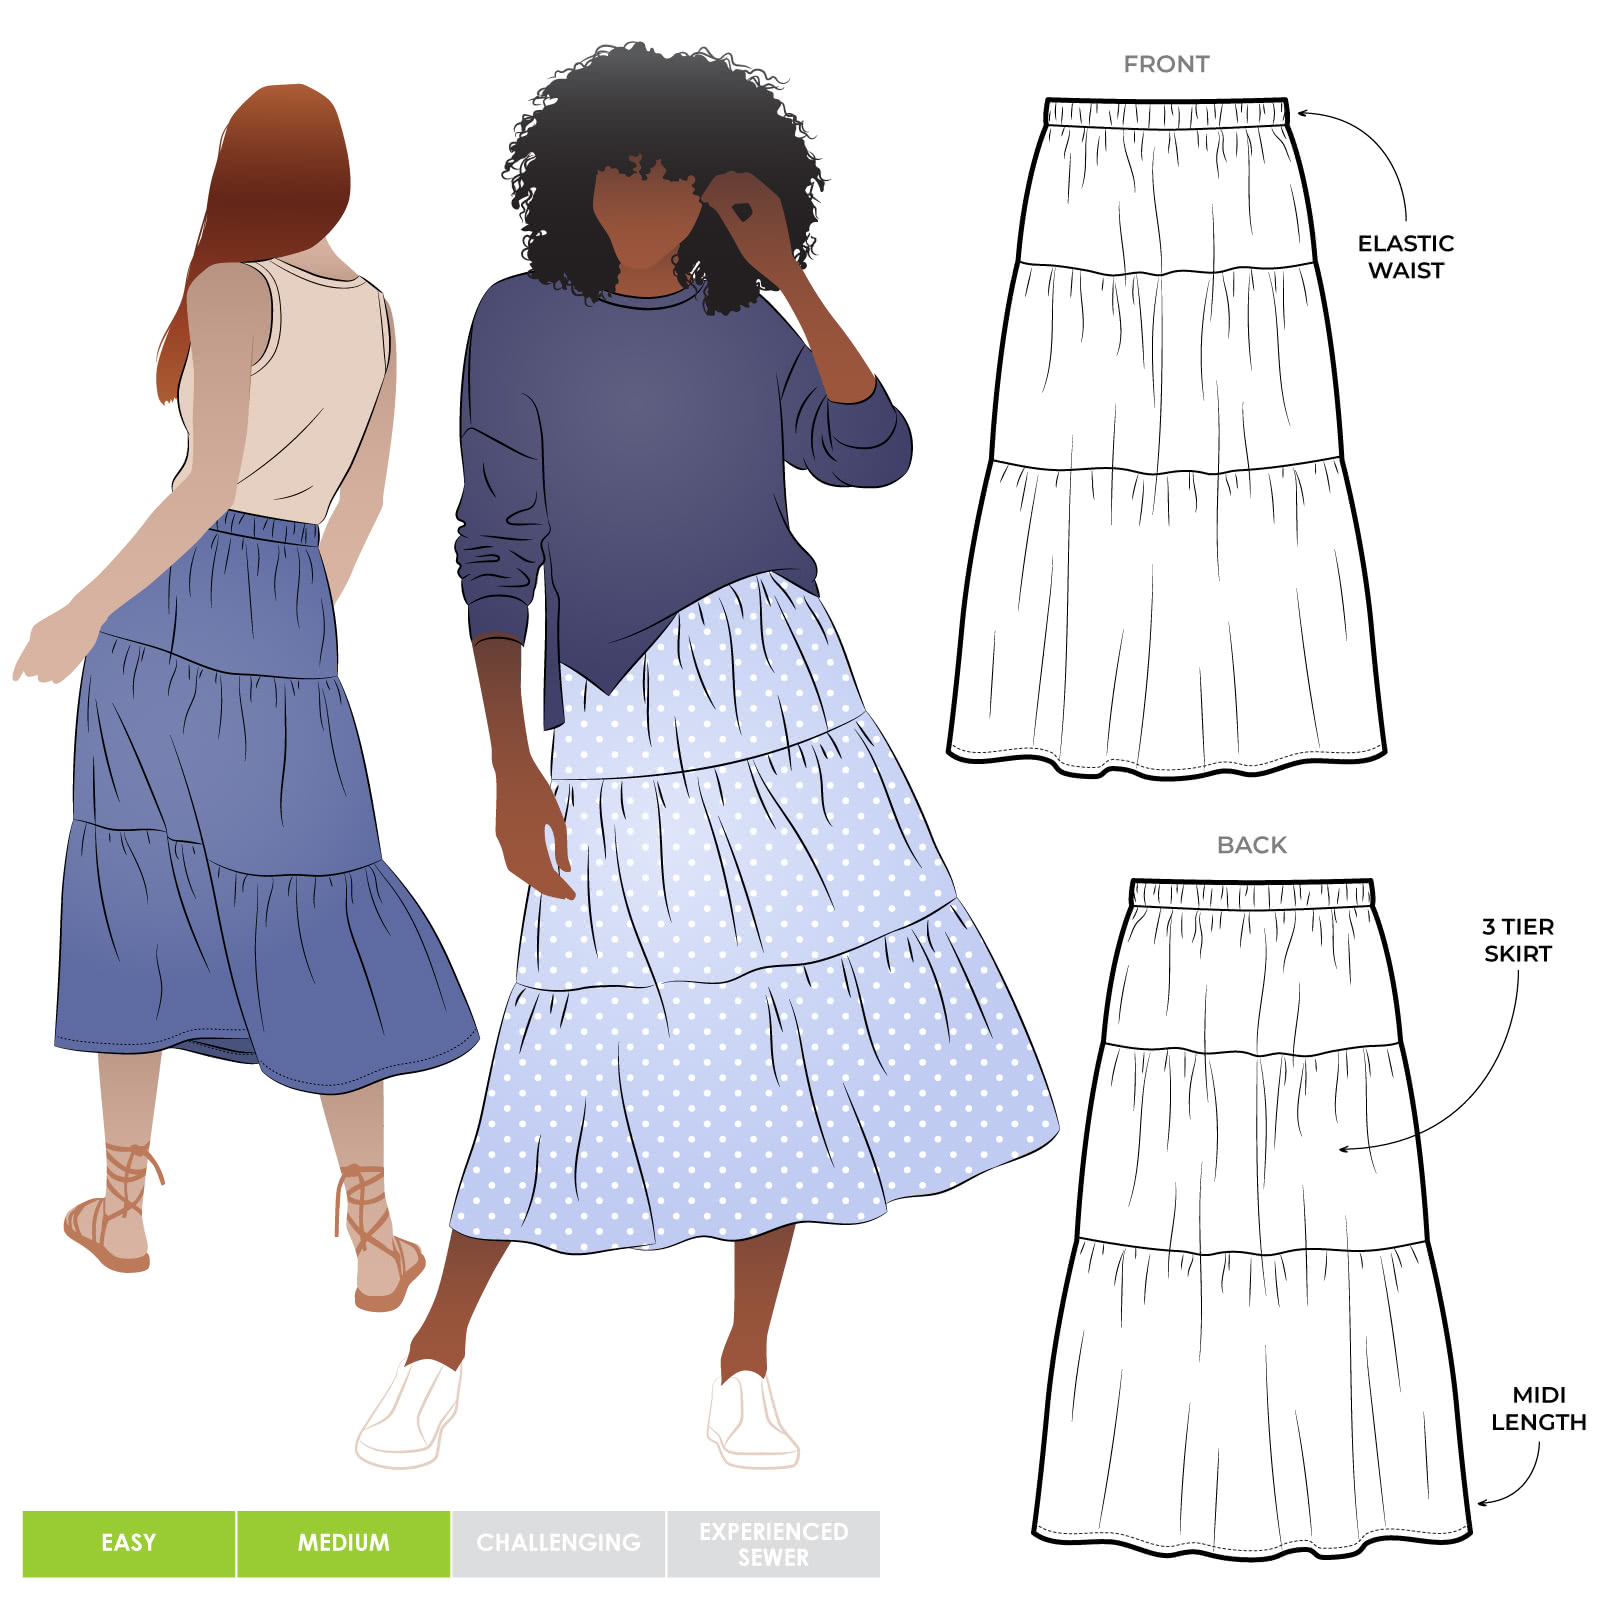 Styling a Tiered Skirt for Different Occasions